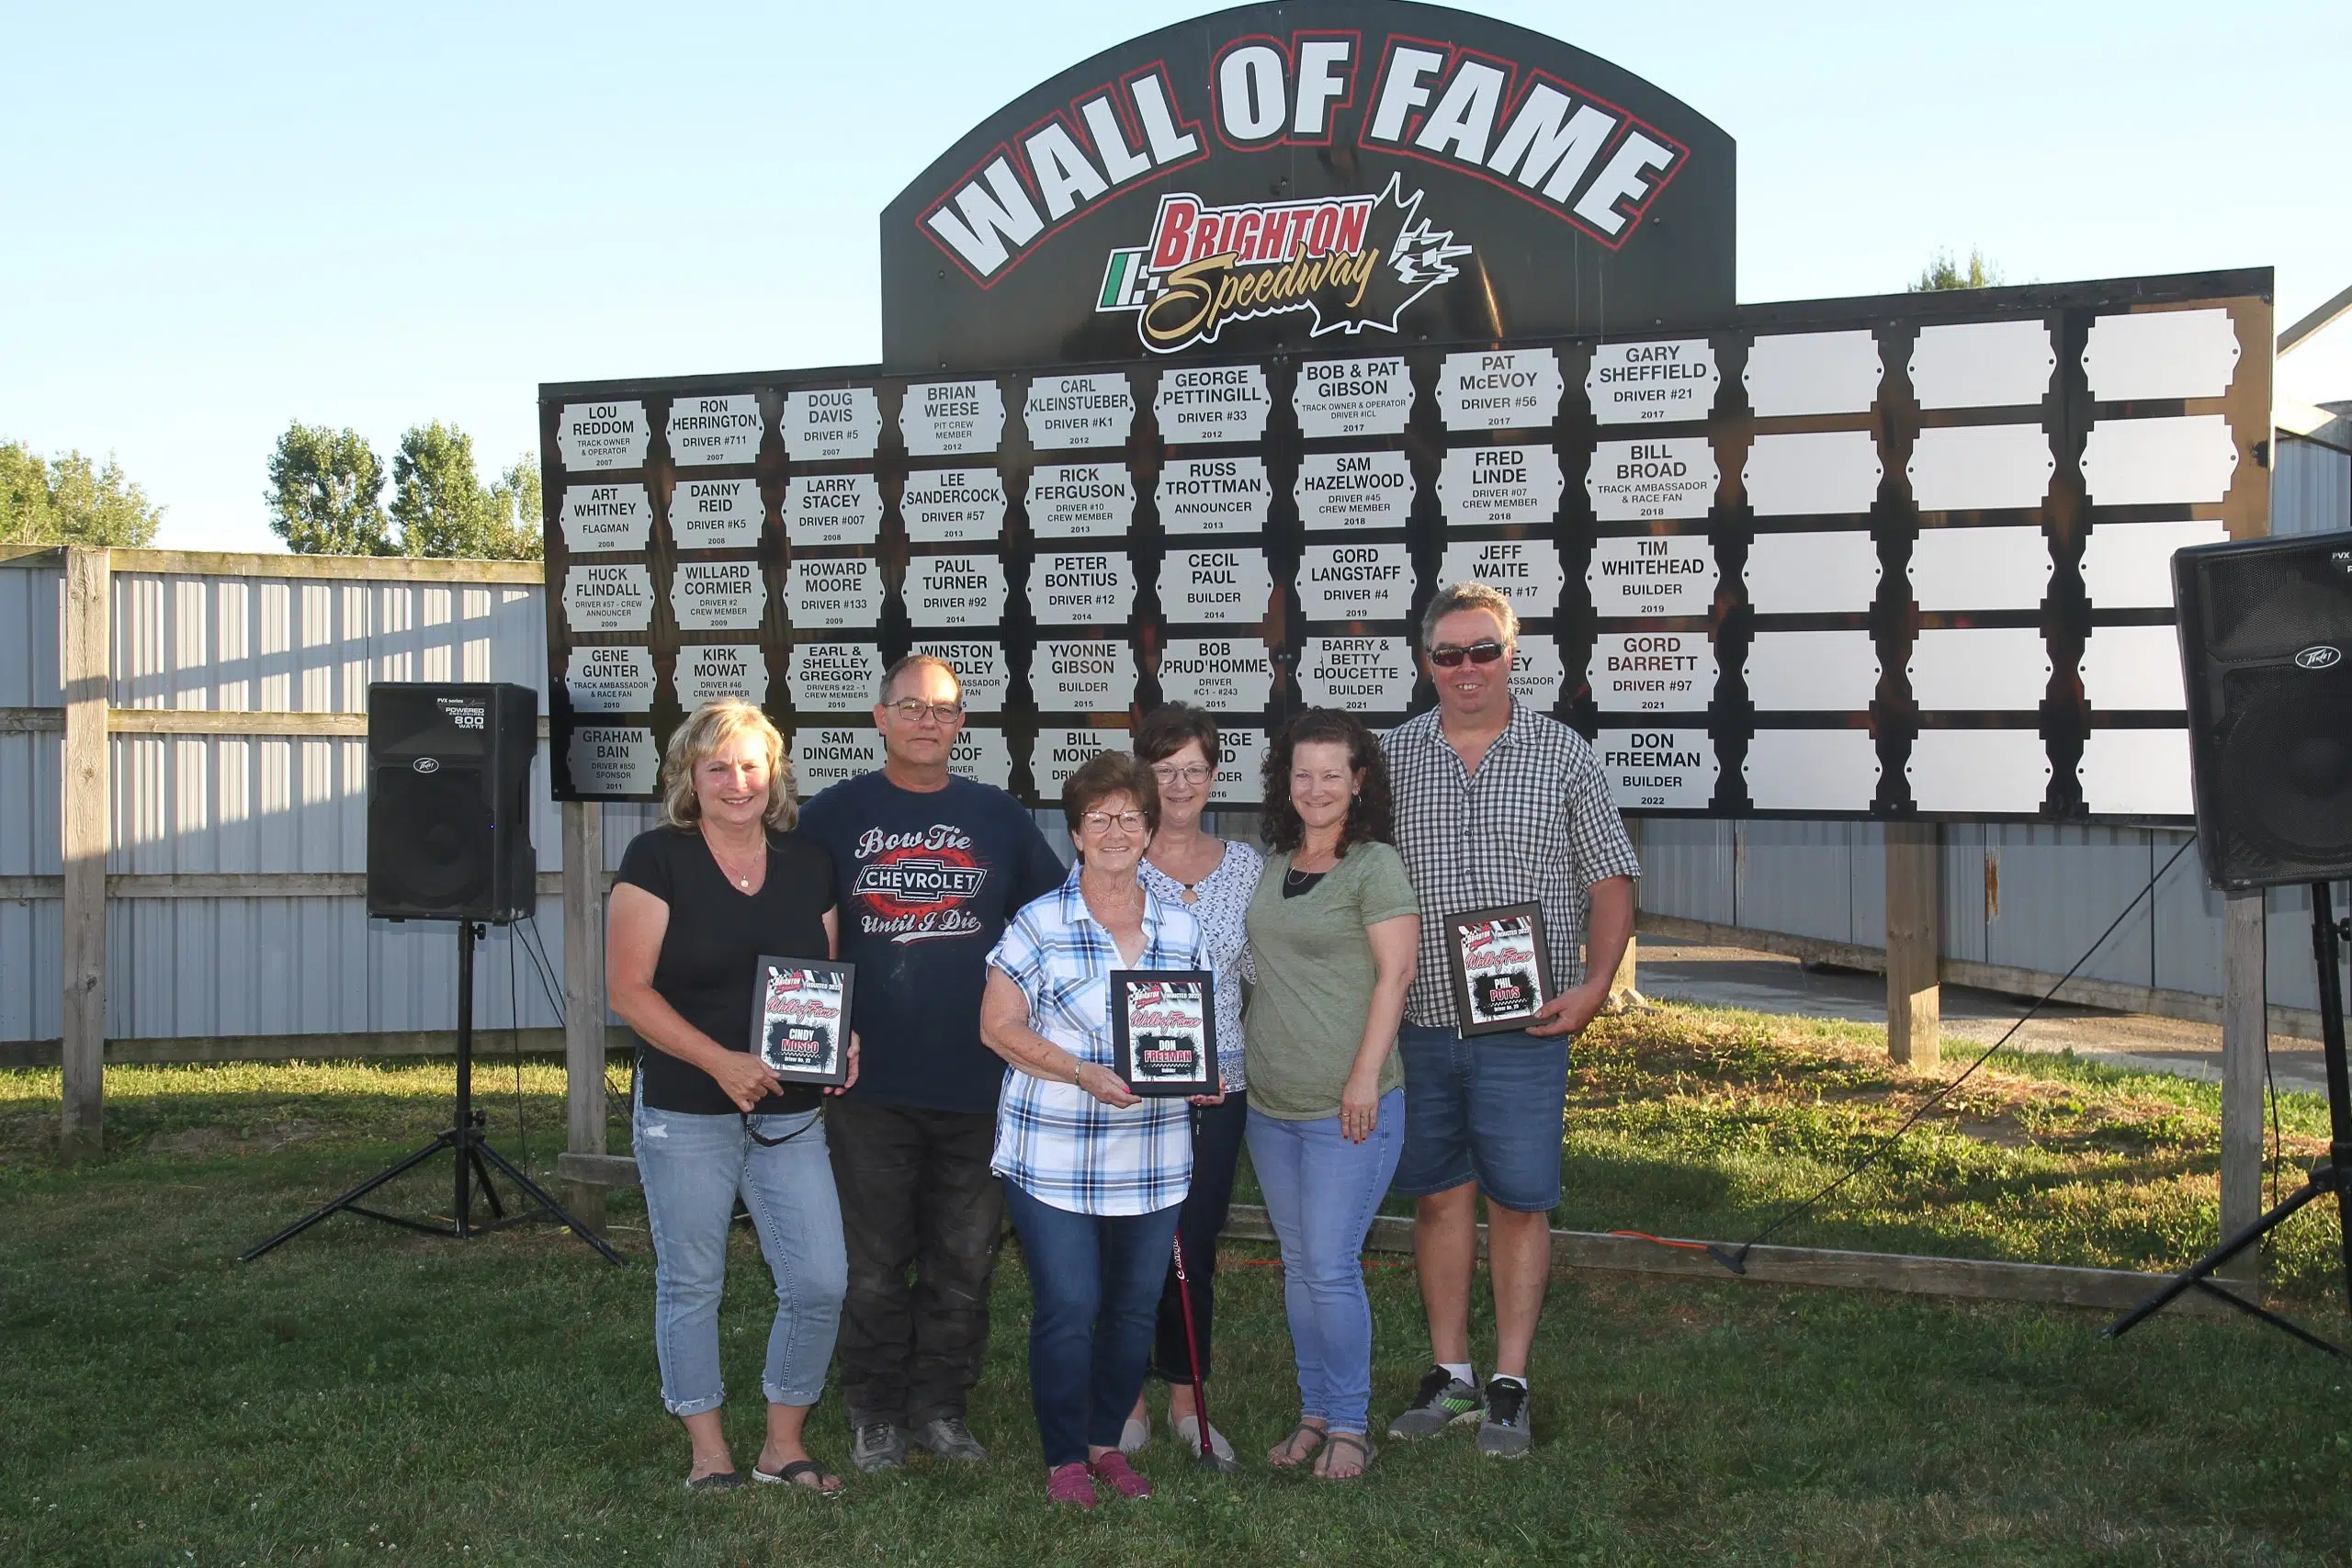 RELEASE - Brighton Speedway inducts three 2022 Wall of Fame recipients